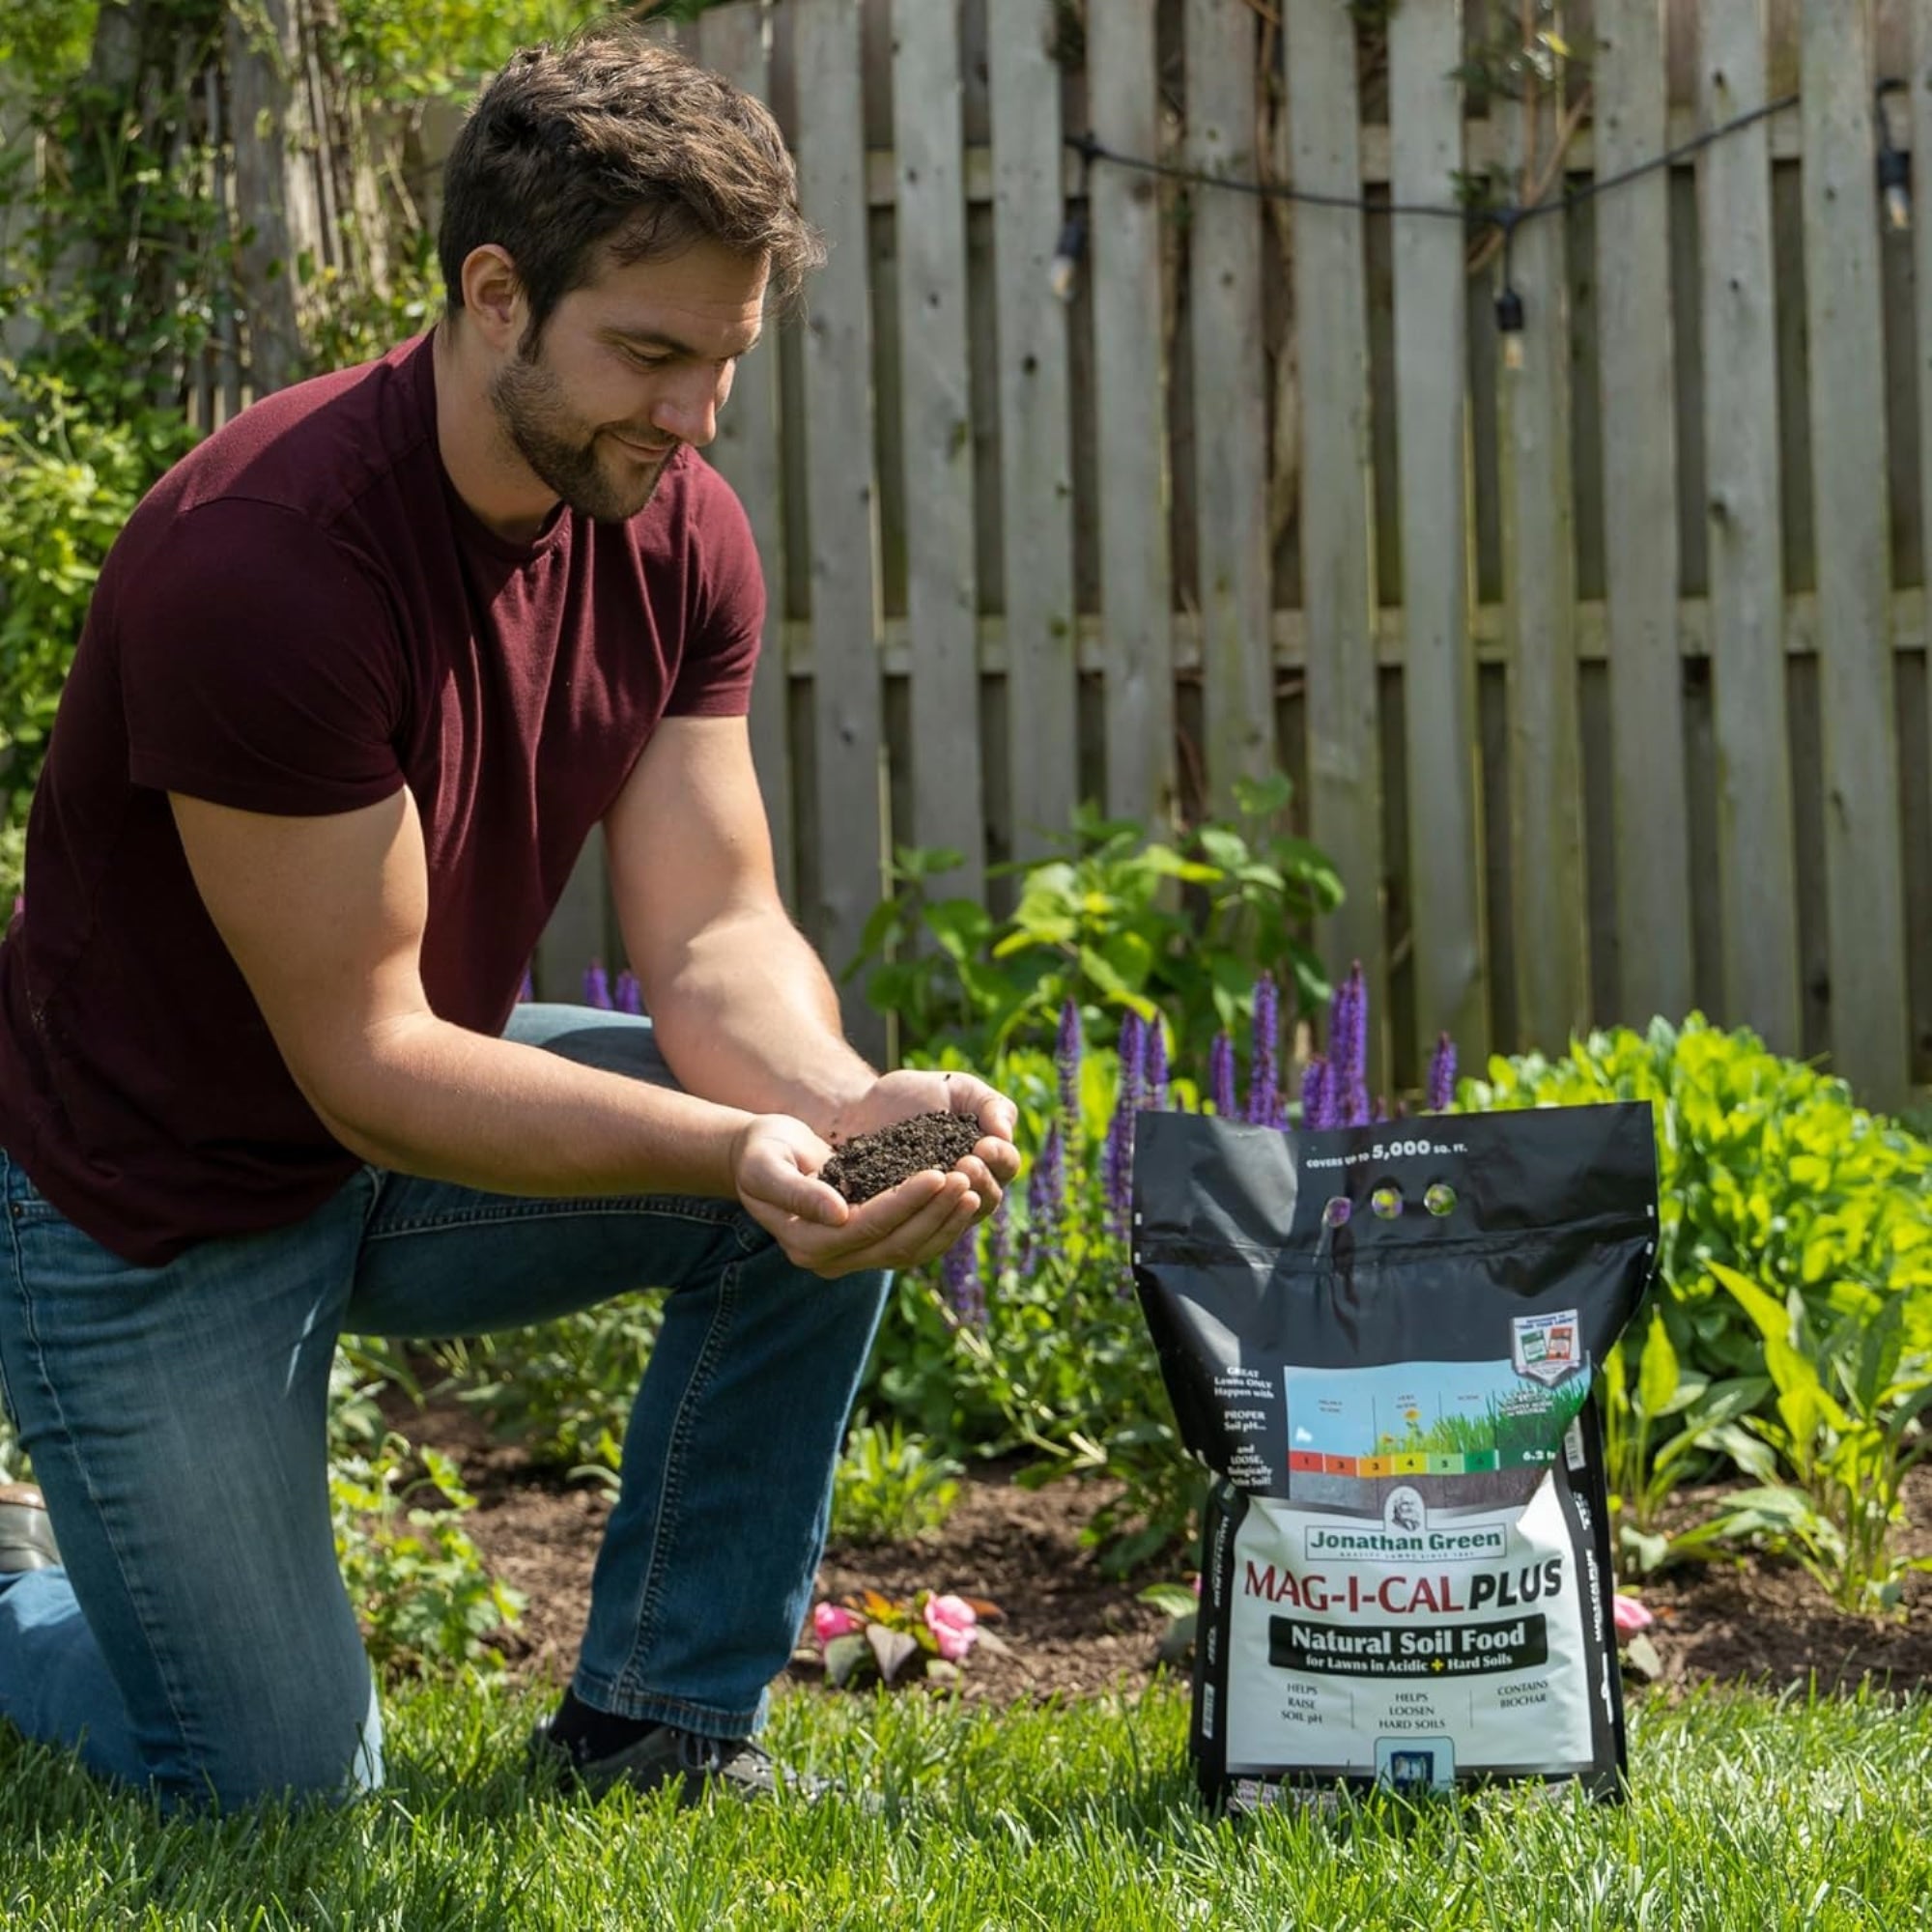 Jonathan Green MAG-I-CAL PLUS Soil Food for Lawns in Acidic + Hard Soils, 5M (Covers up to 5000 sq ft) 18lb